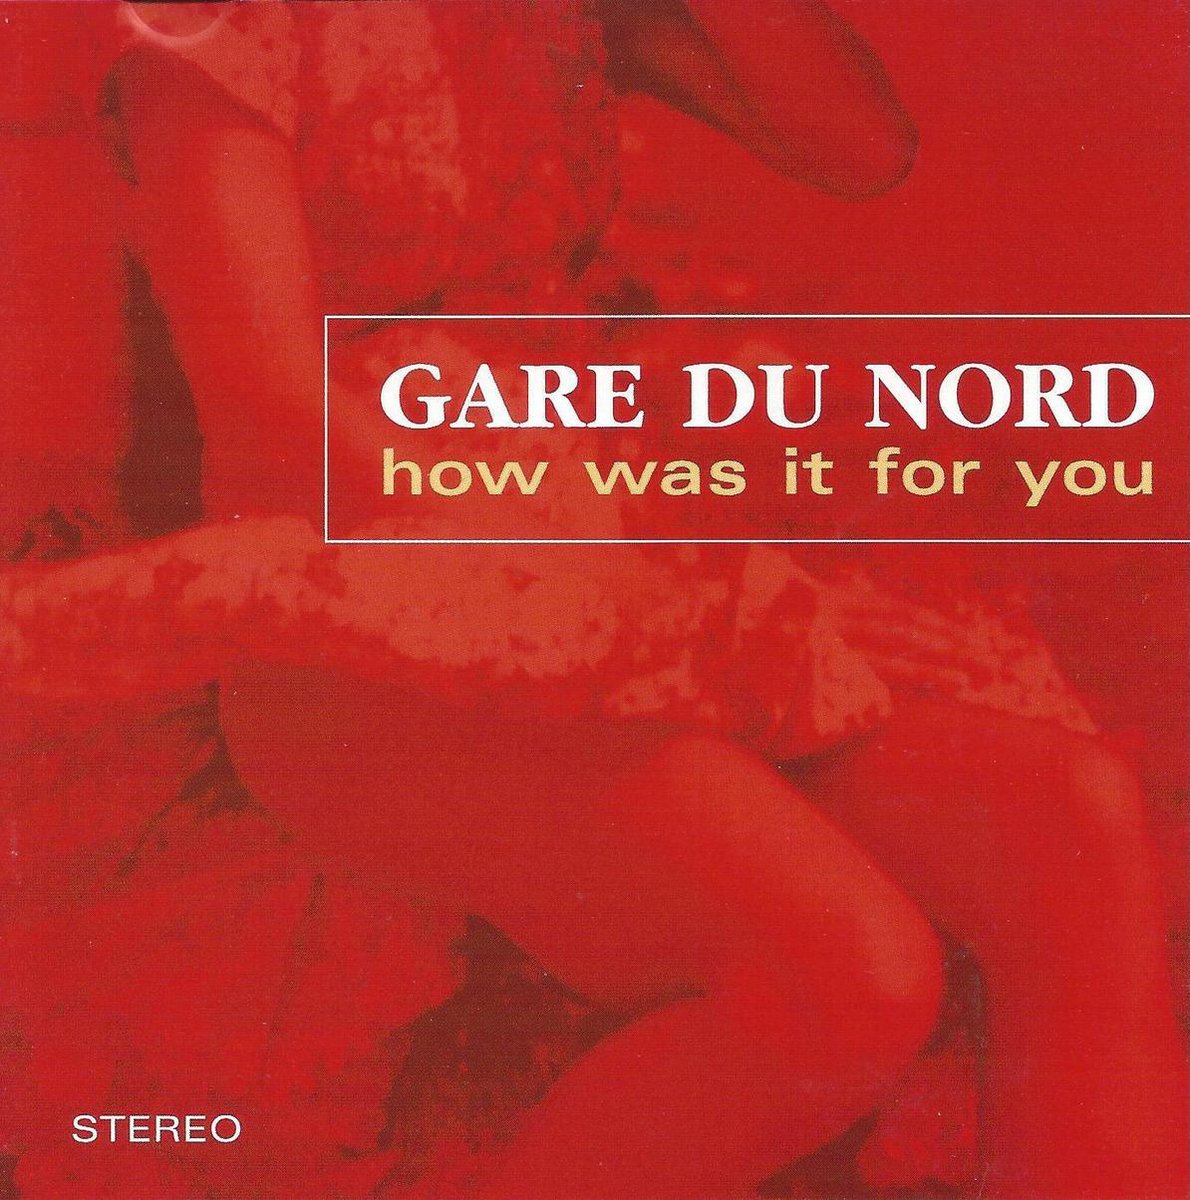 Gare Du Nord - How was it for you